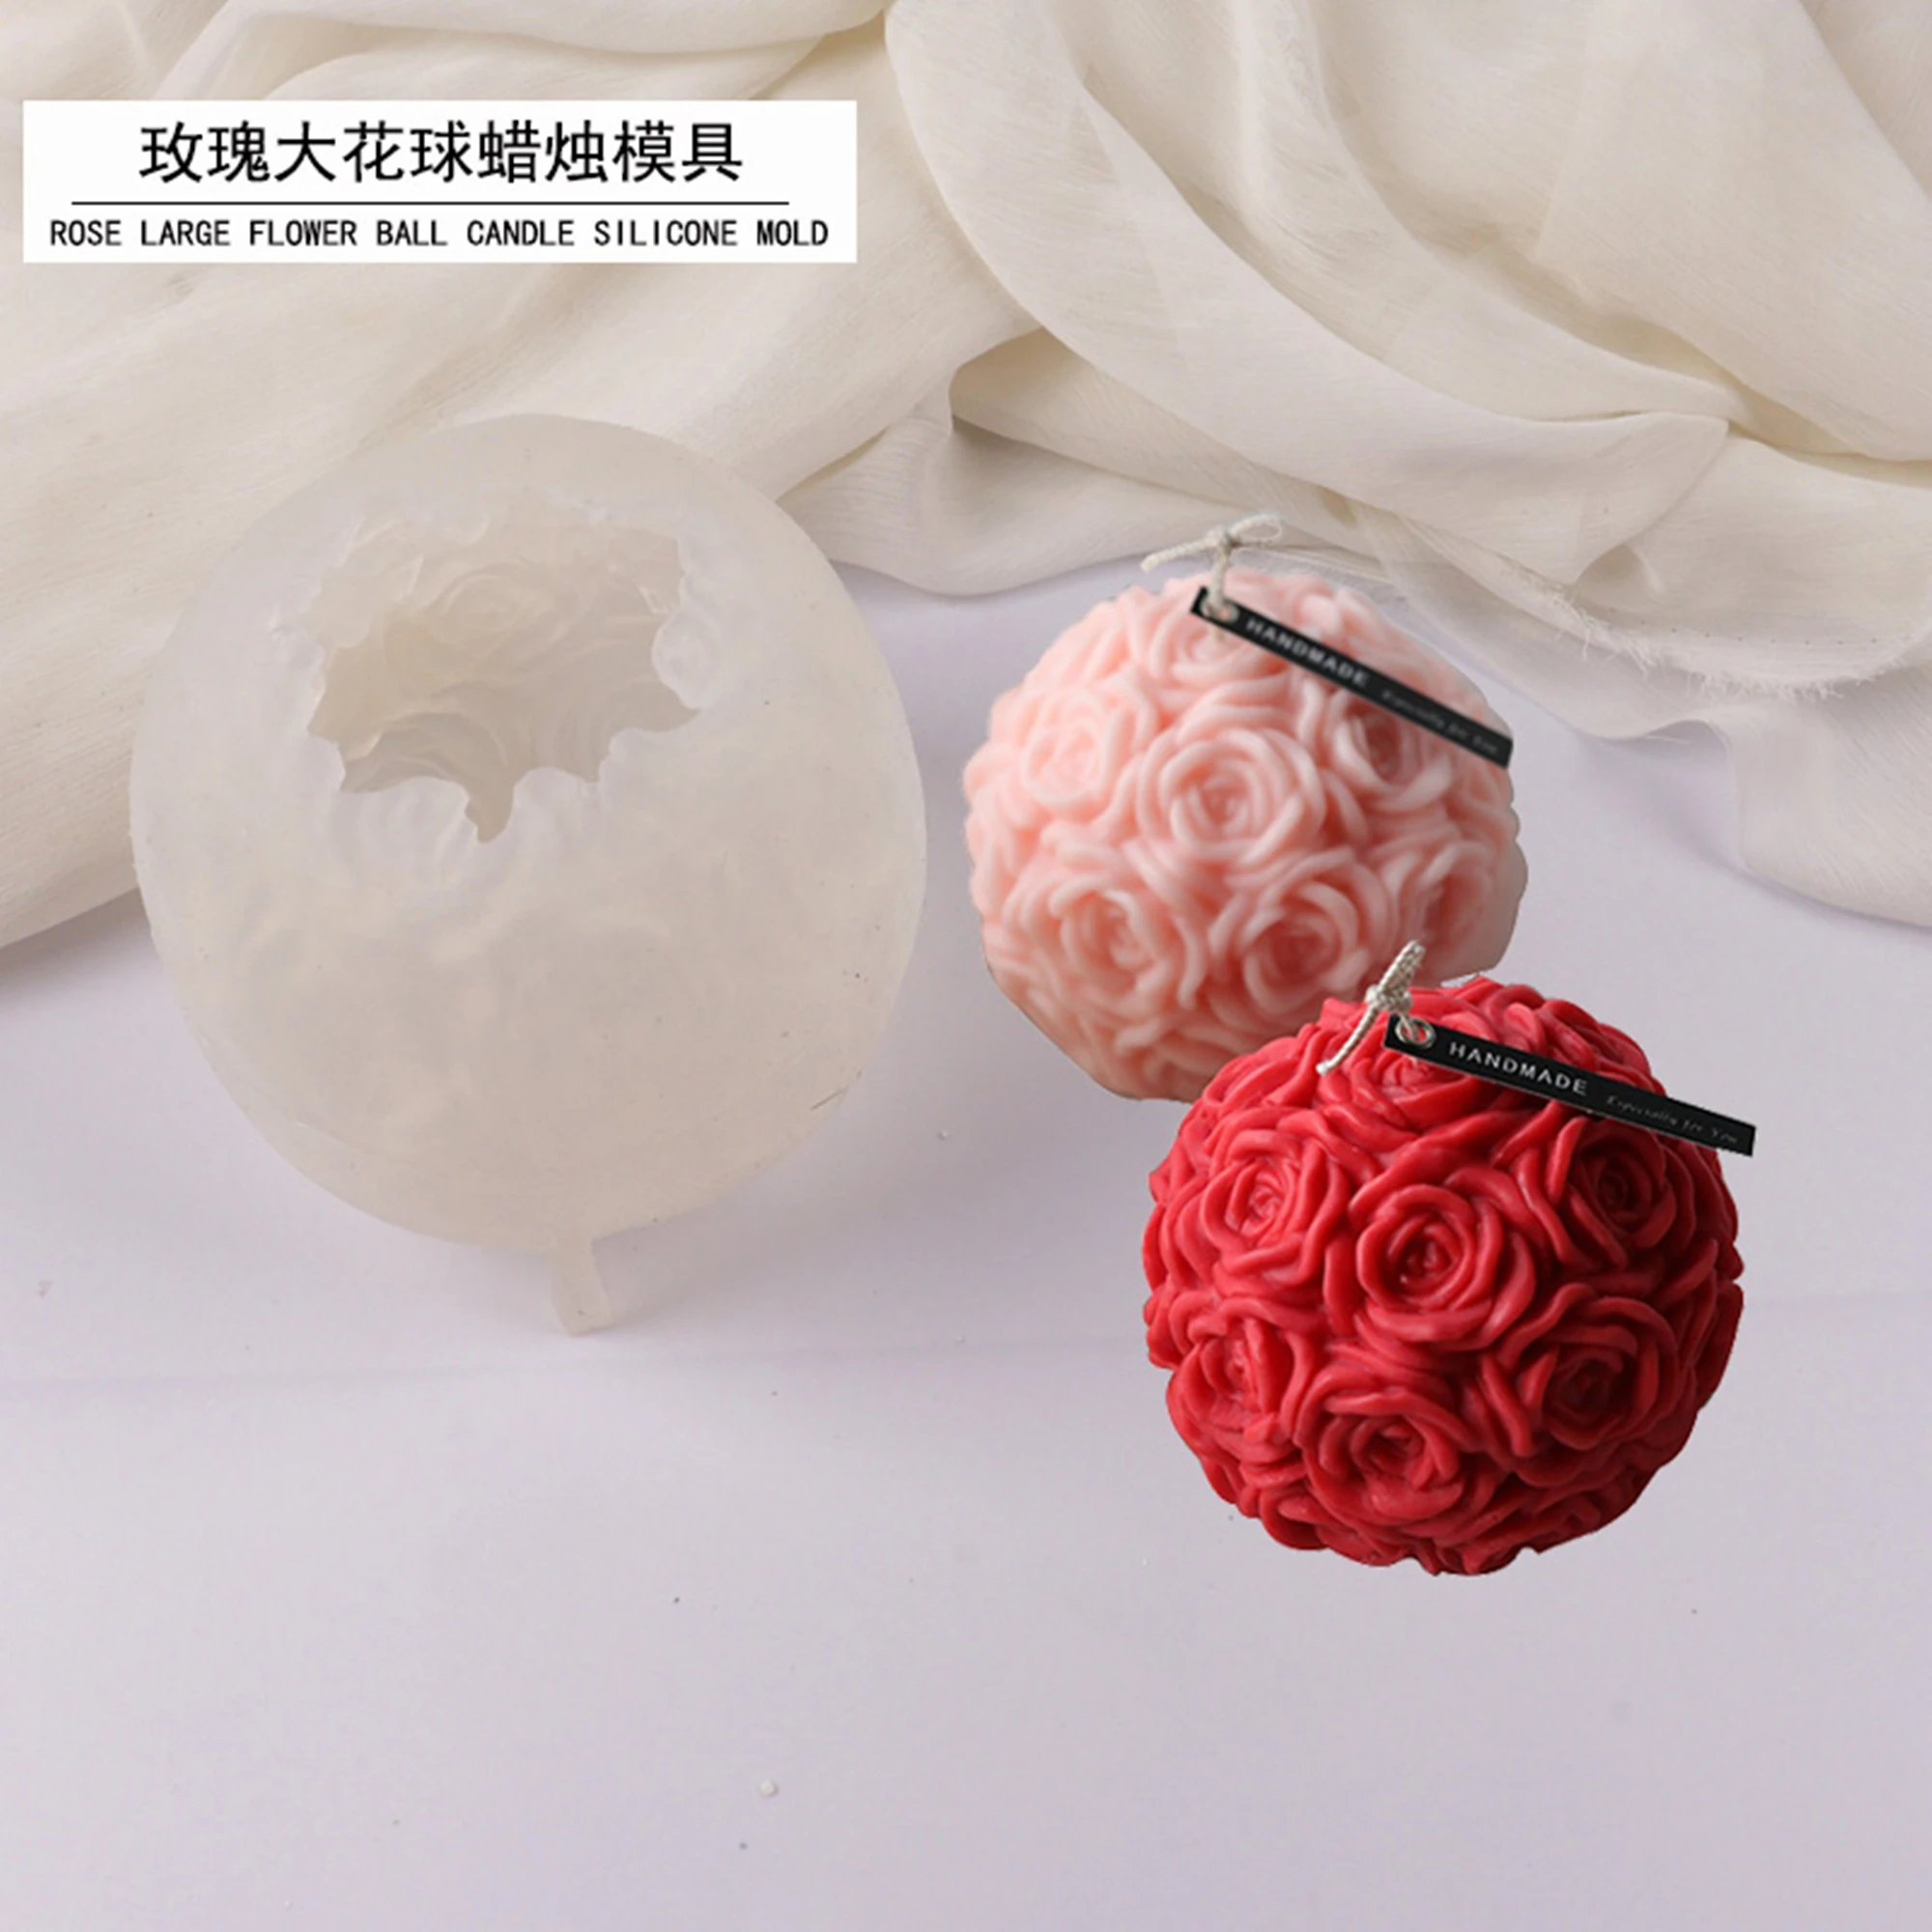 Silicone Candle Mold Rose Ball Aromatherapy Candle Soap Mould Craft Baking To`fr 